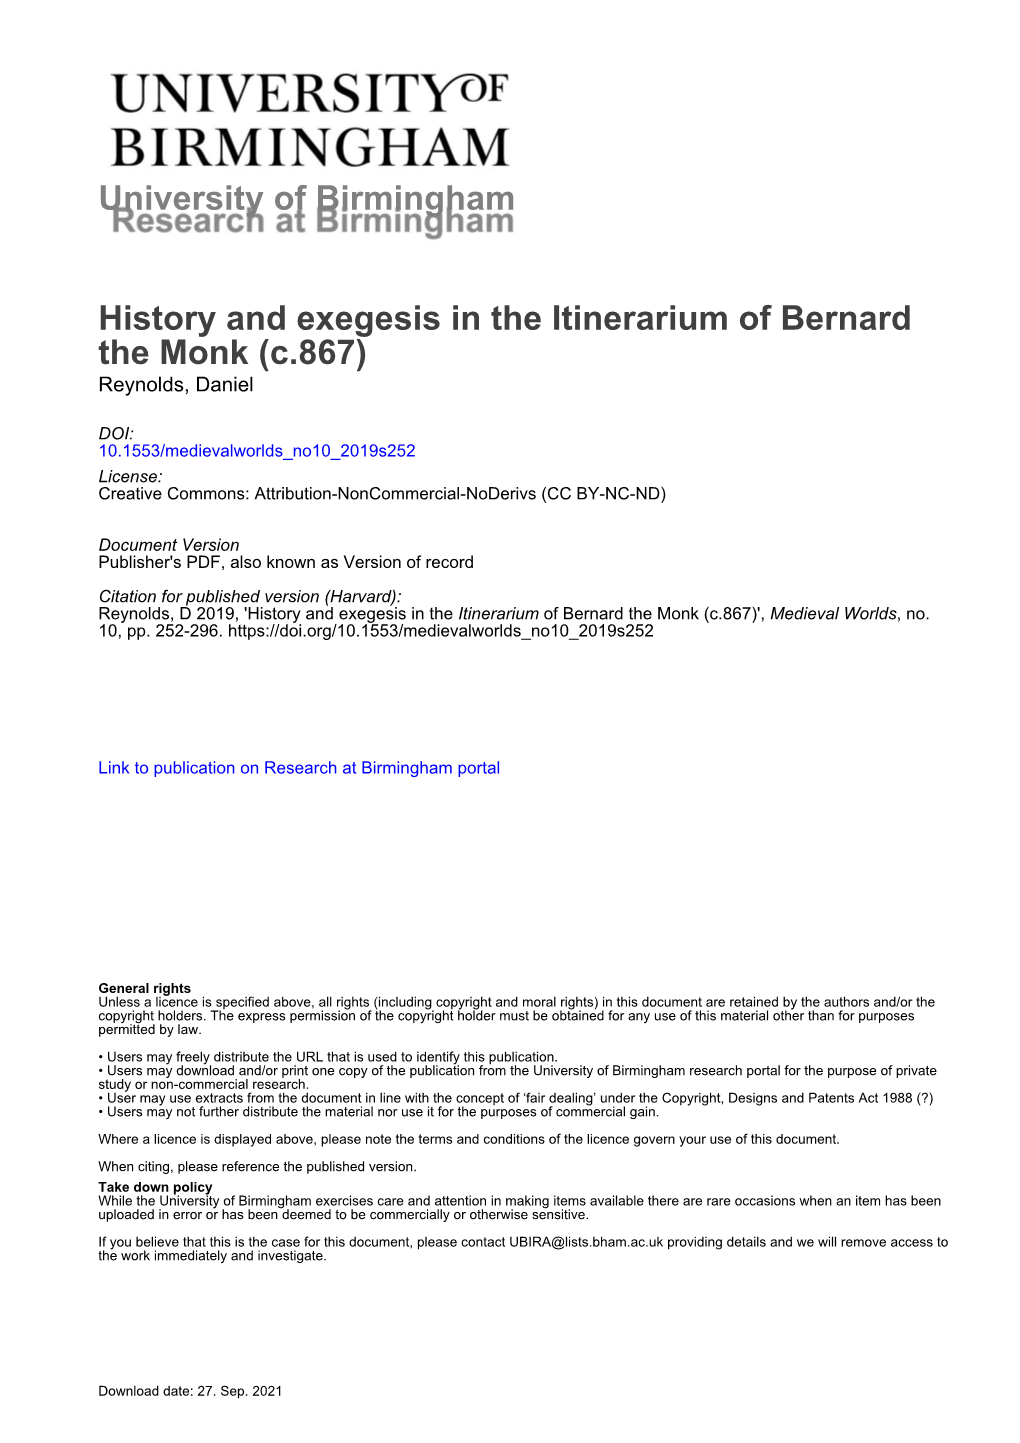 University of Birmingham History and Exegesis in the Itinerarium